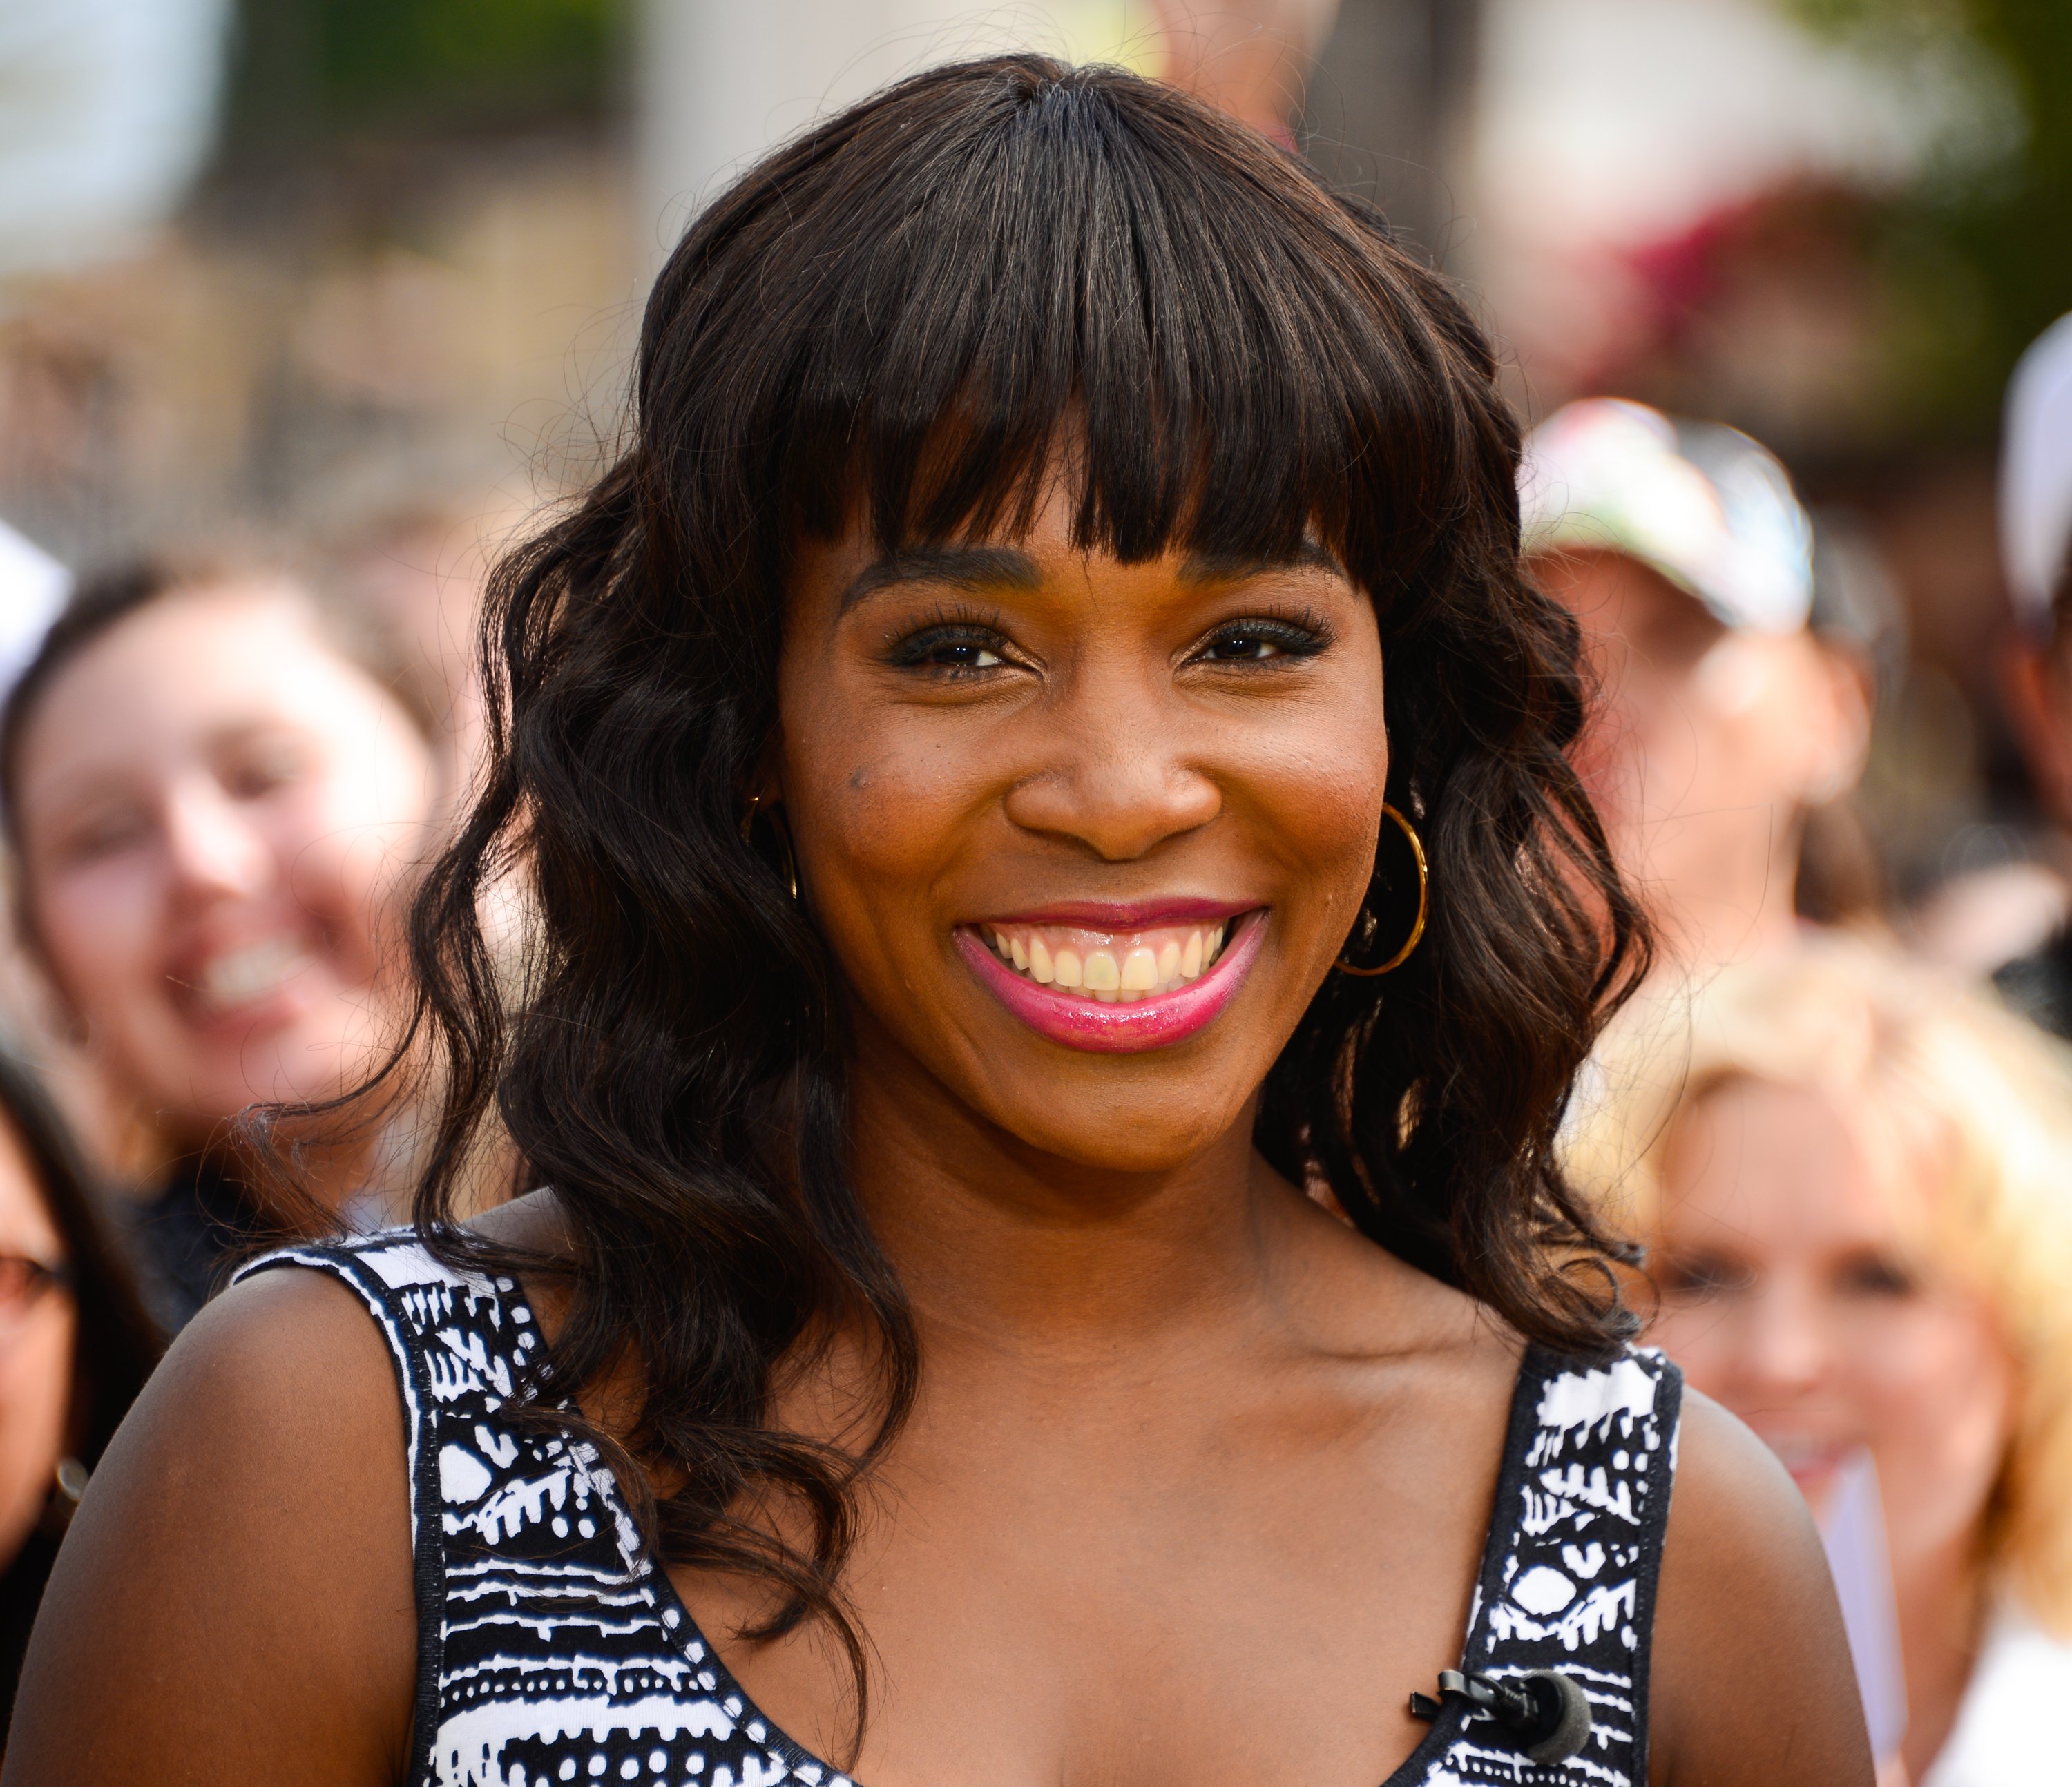 Venus Williams pictured at Universal Studios Hollywood on April 22, 2014 in Universal City, California. | Source: Getty Images